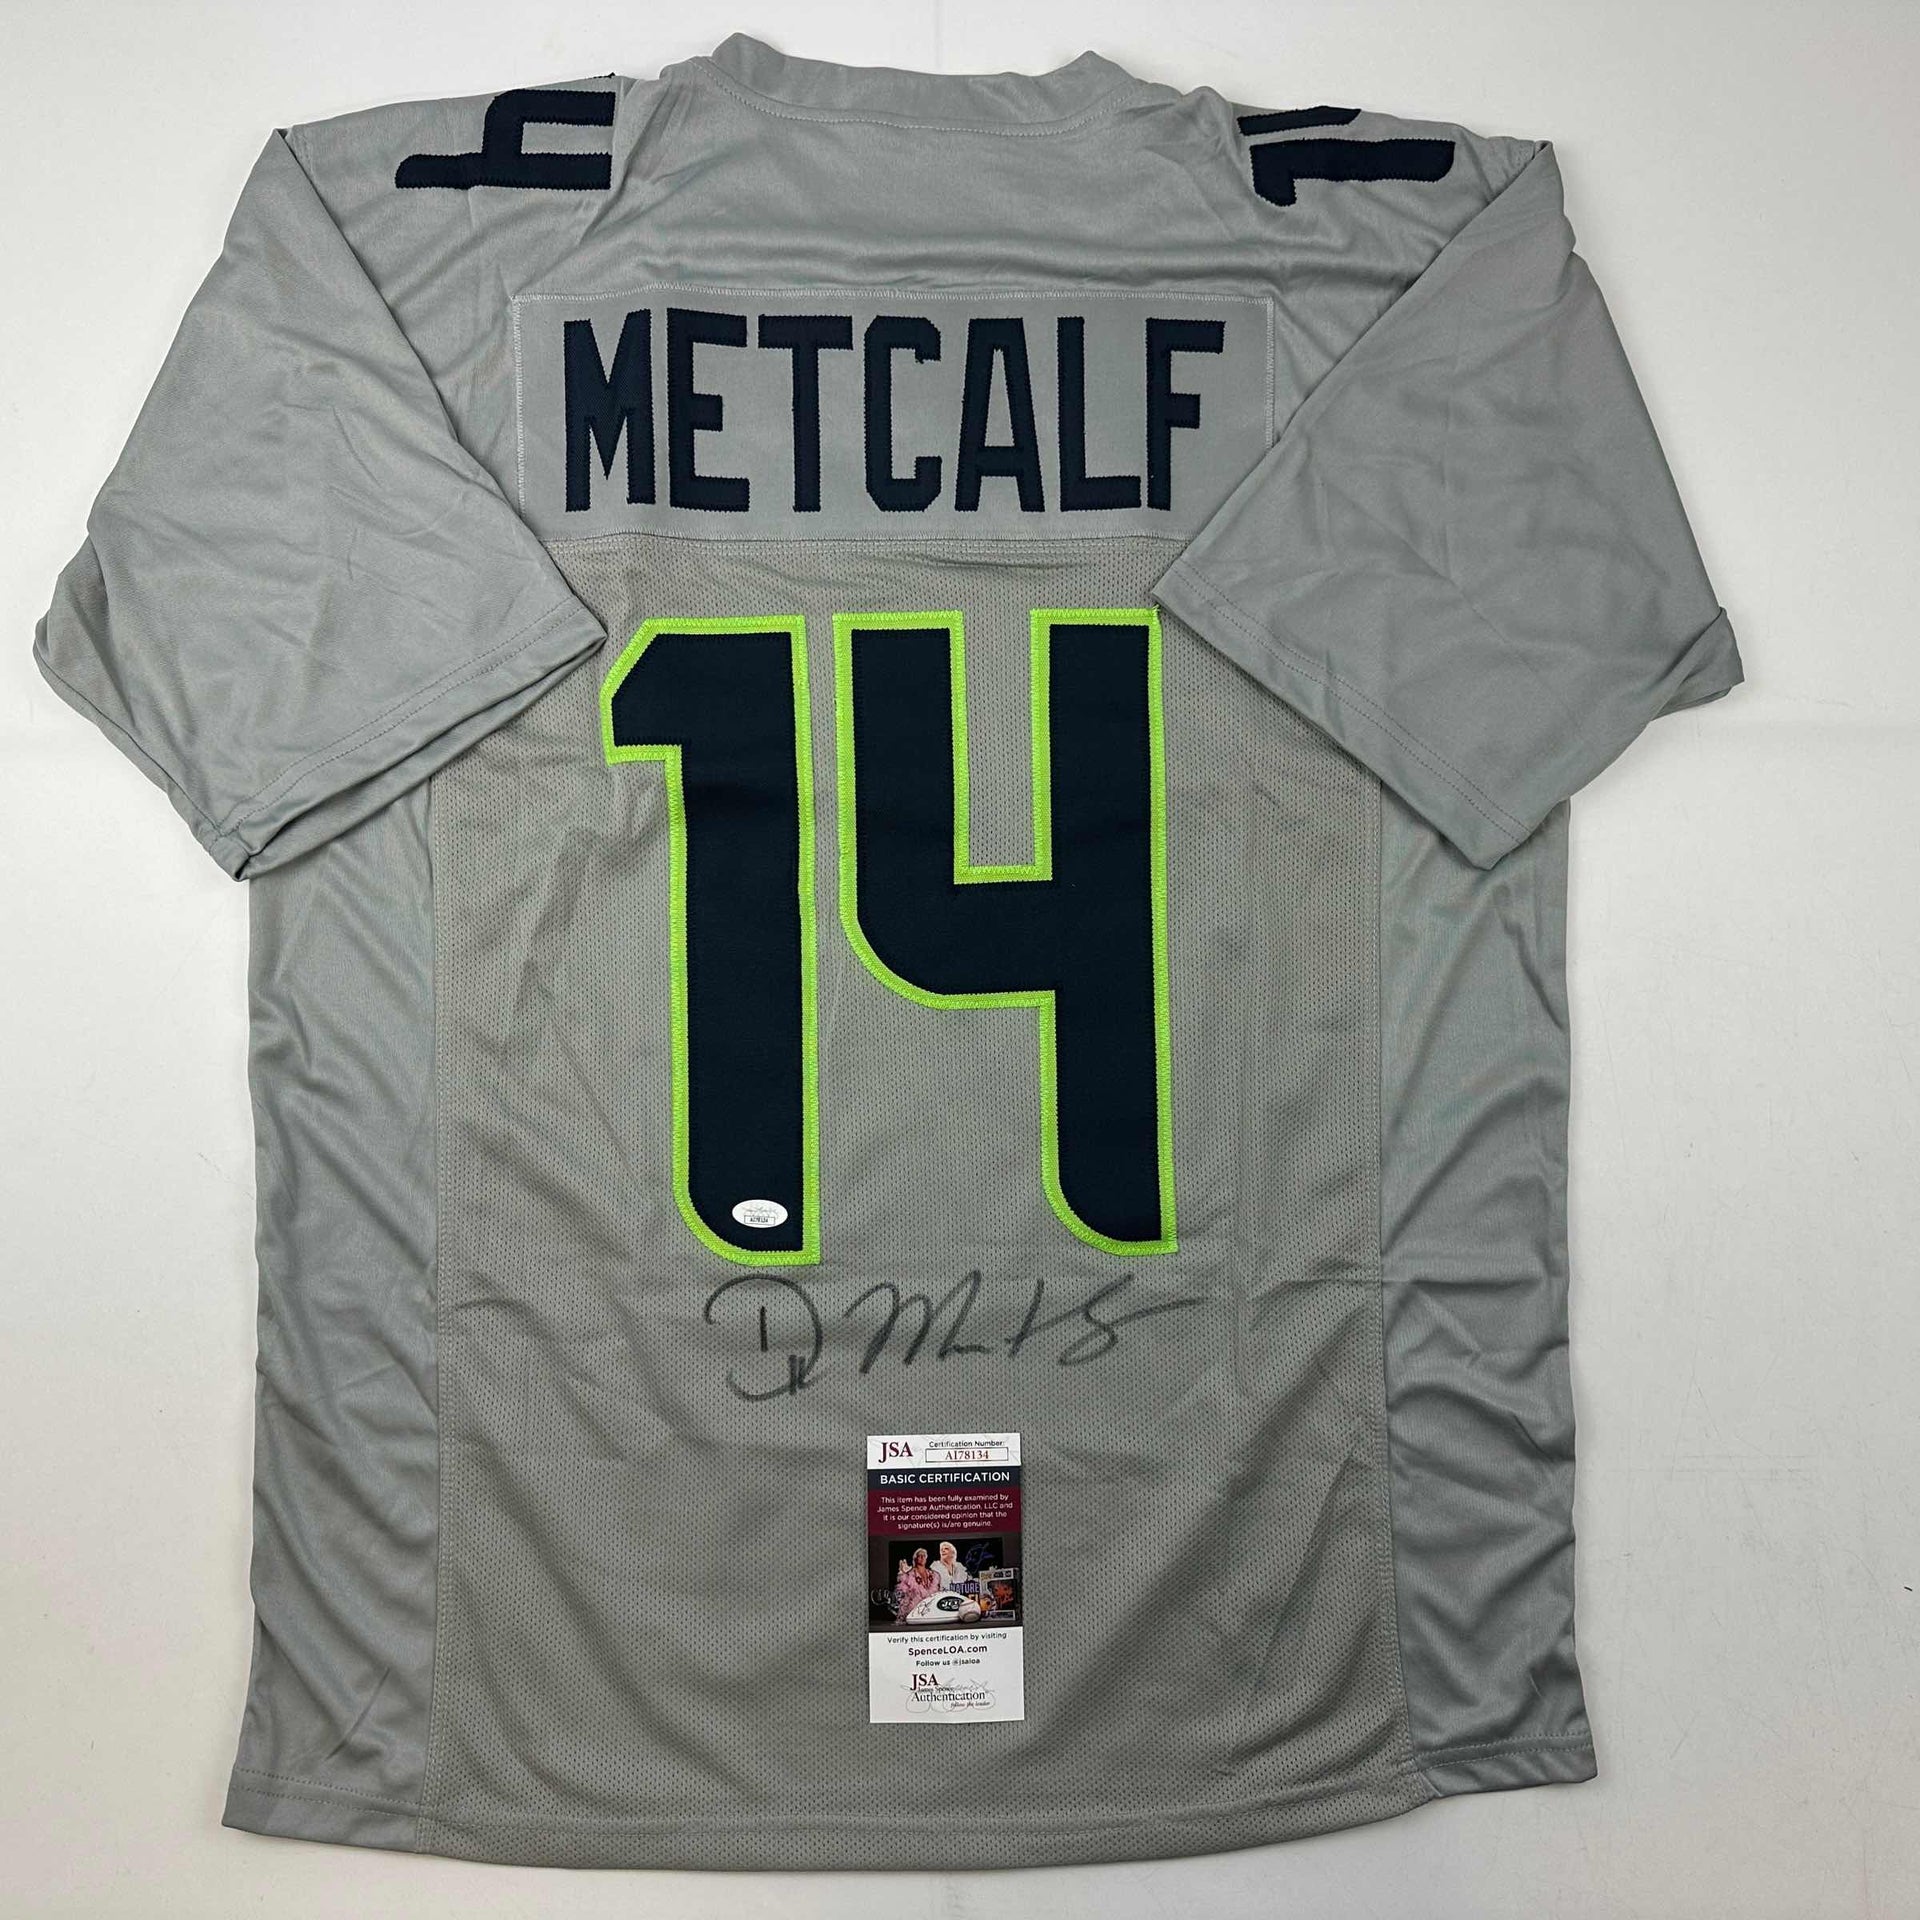 Autographed/Signed DK D.K. Metcalf Seattle Grey Football Jersey